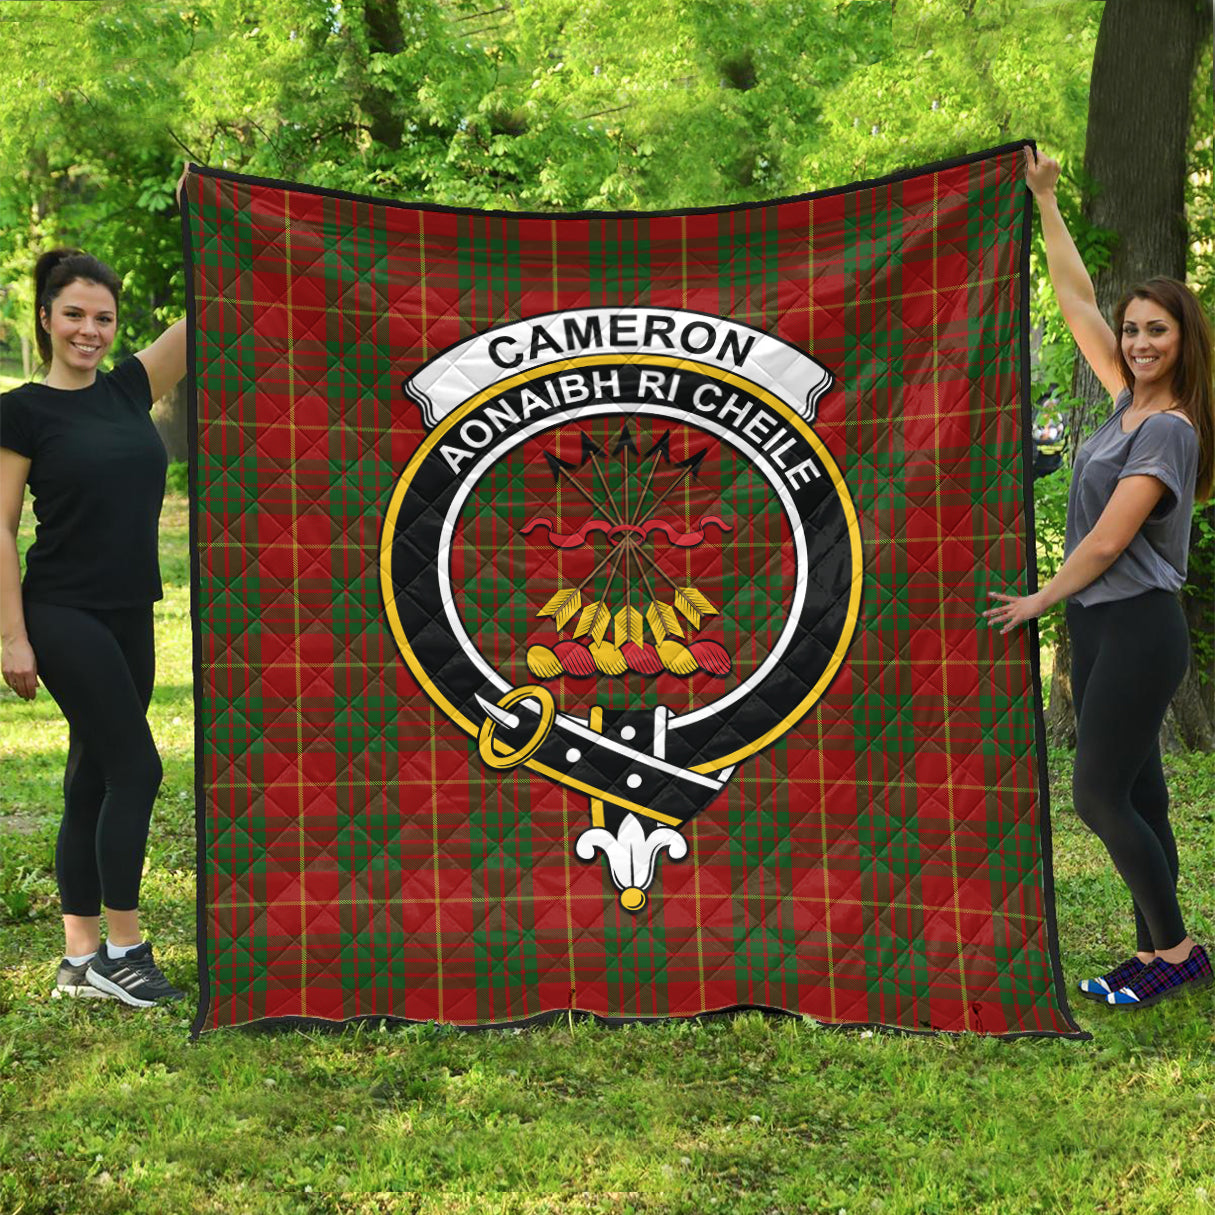 cameron-tartan-quilt-with-family-crest